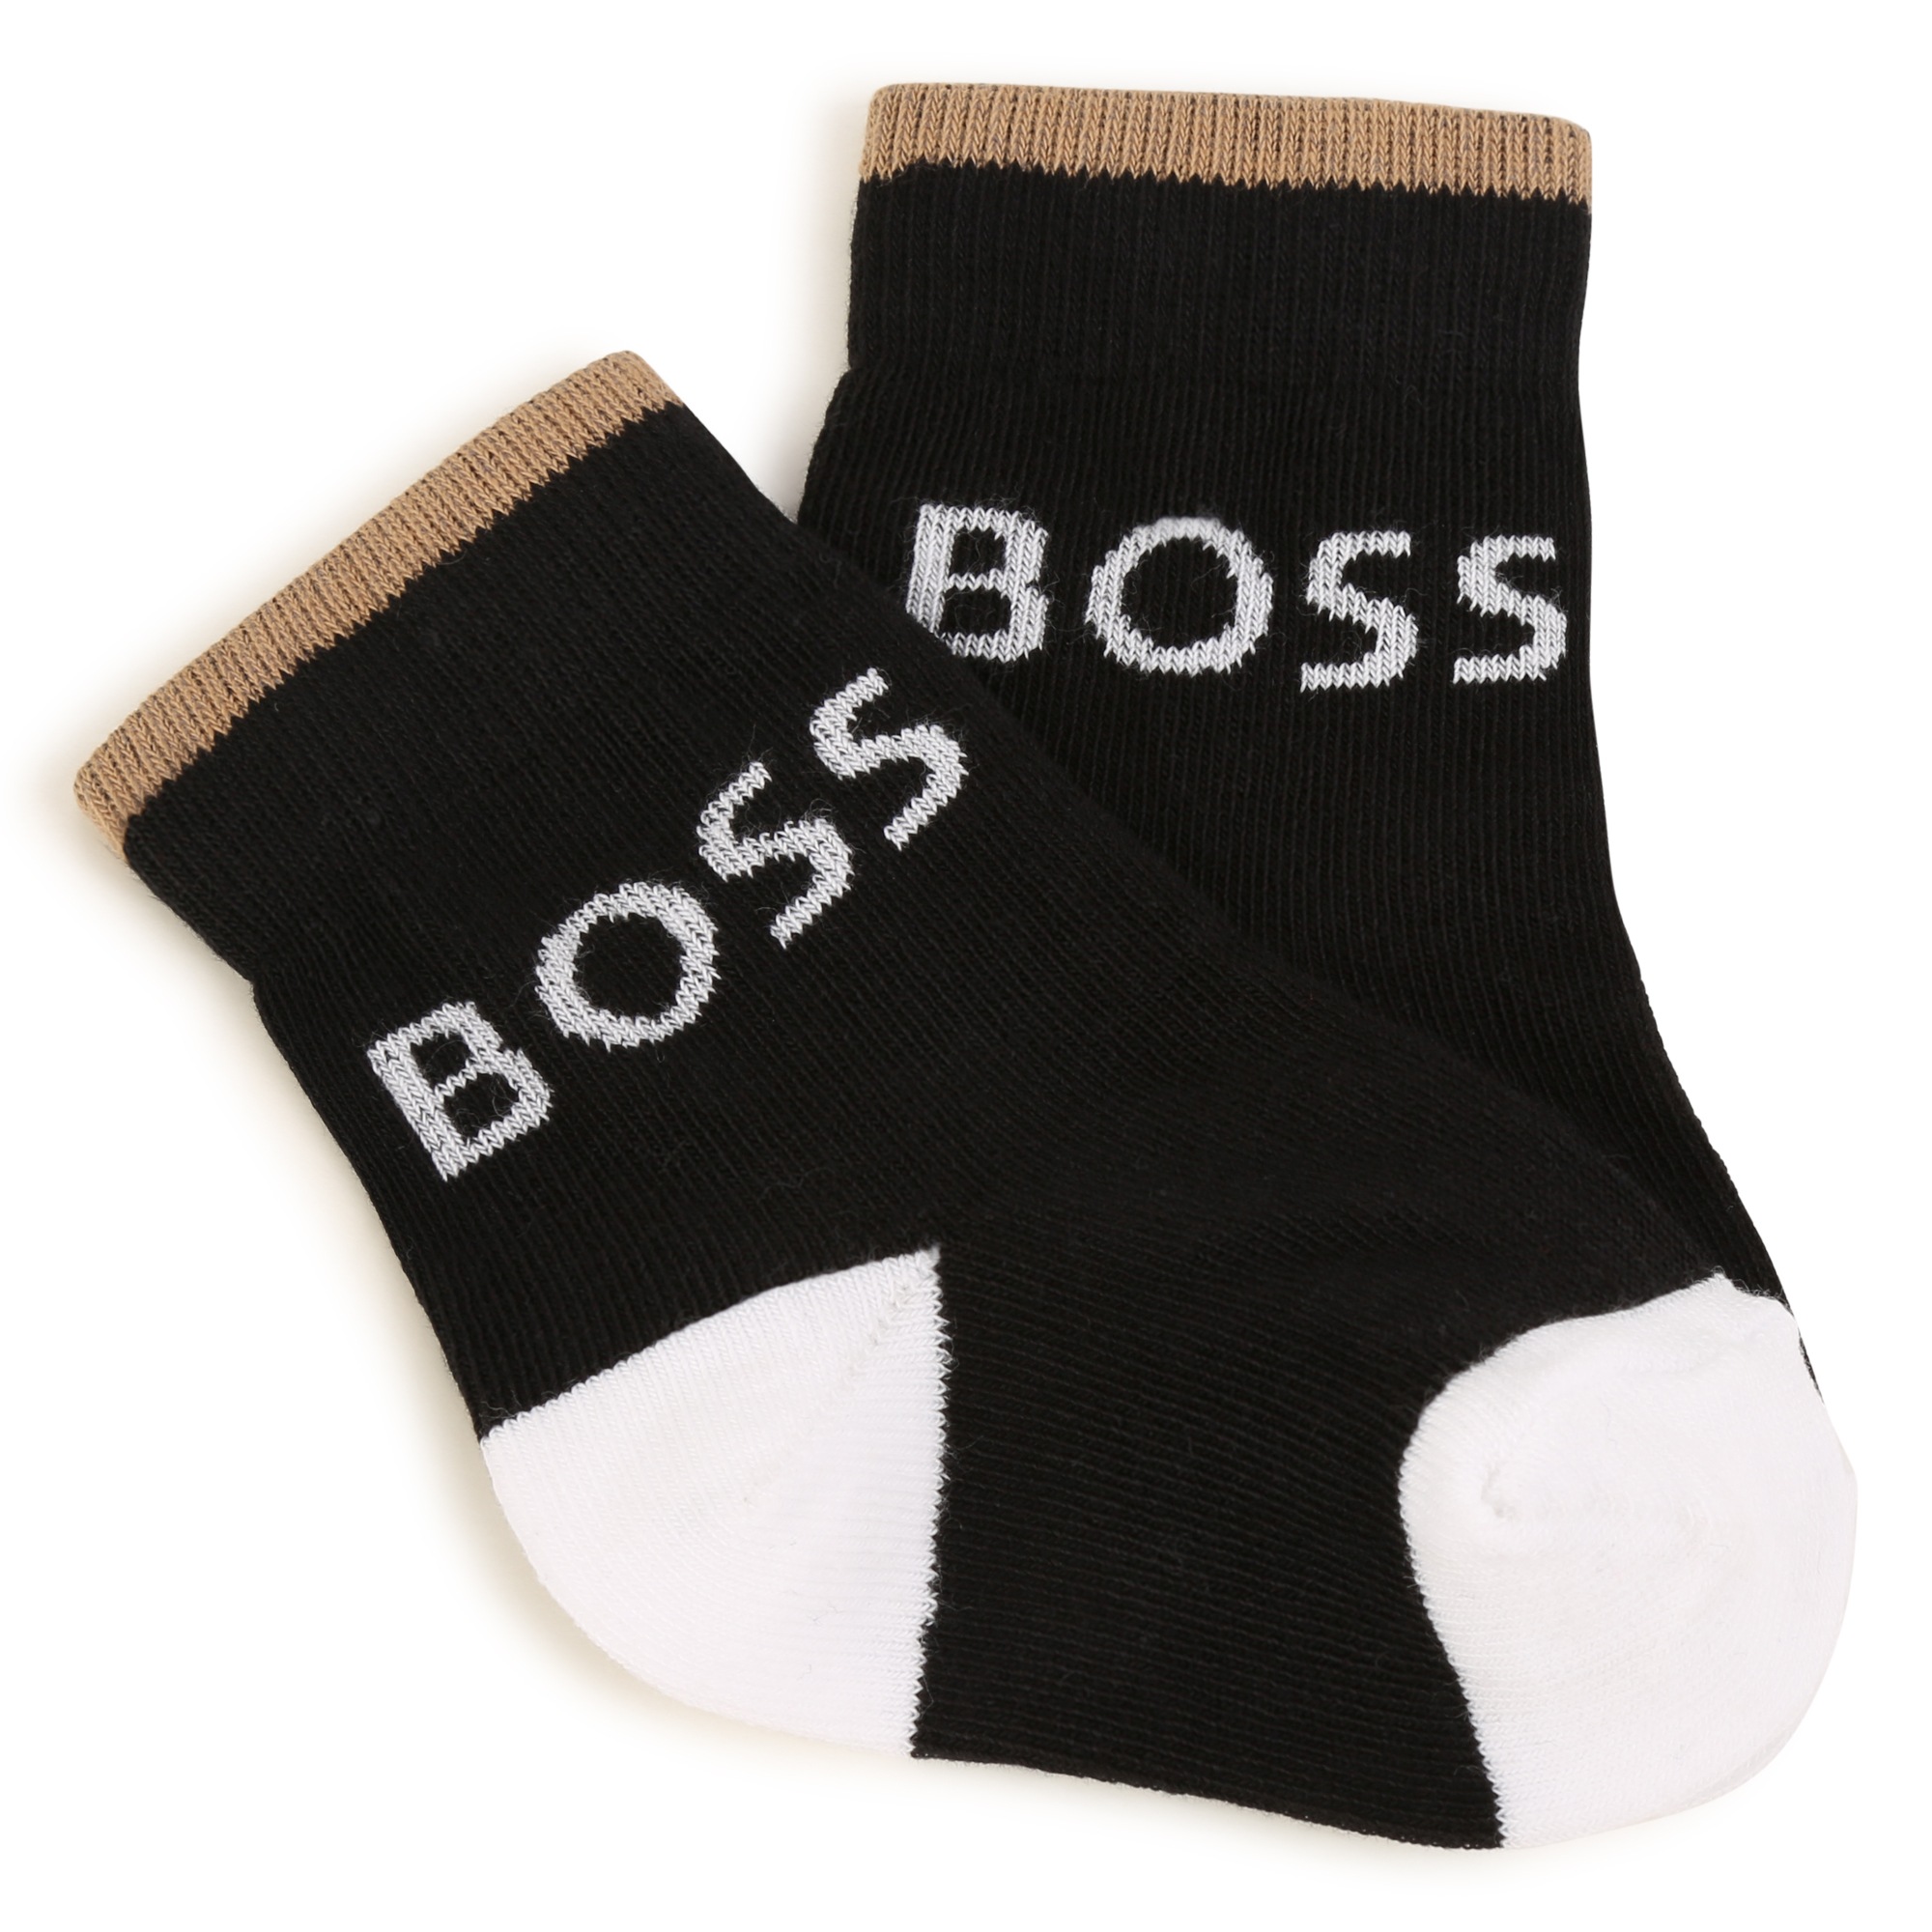 Lot of 2 pairs of socks BOSS for BOY